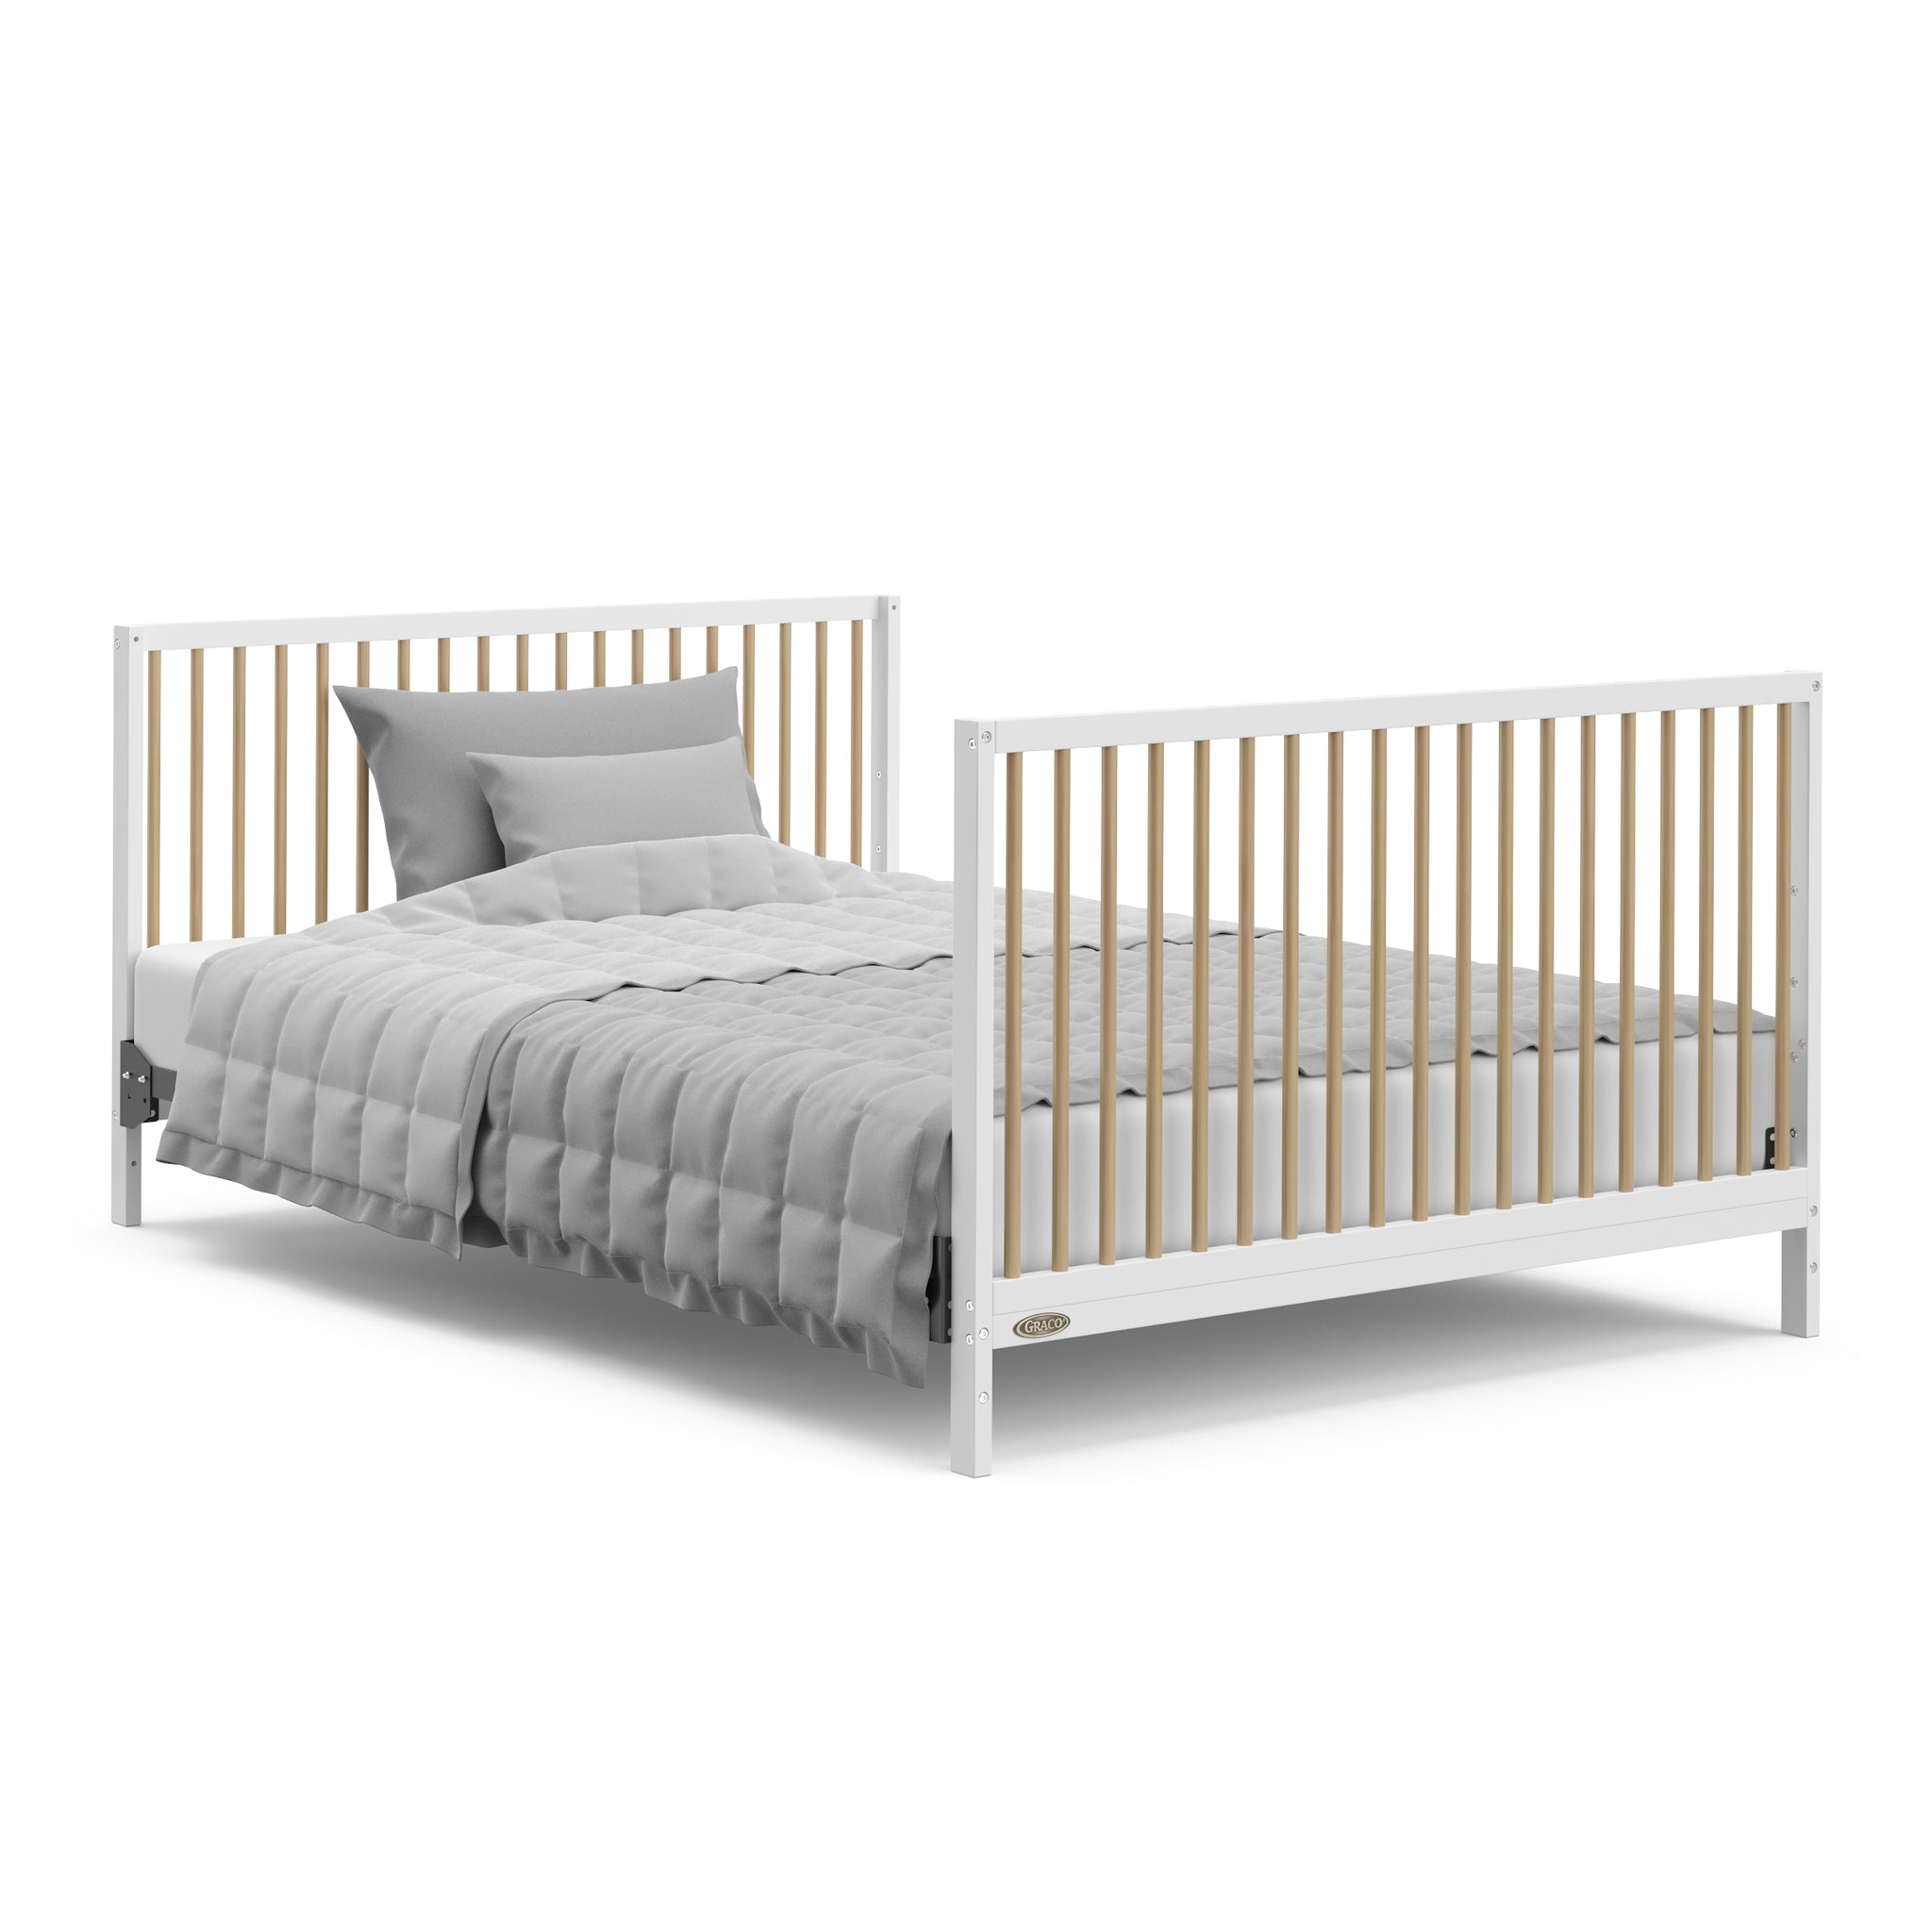 White with driftwood crib with drawer in full-size bed with headboard and footboard conversion